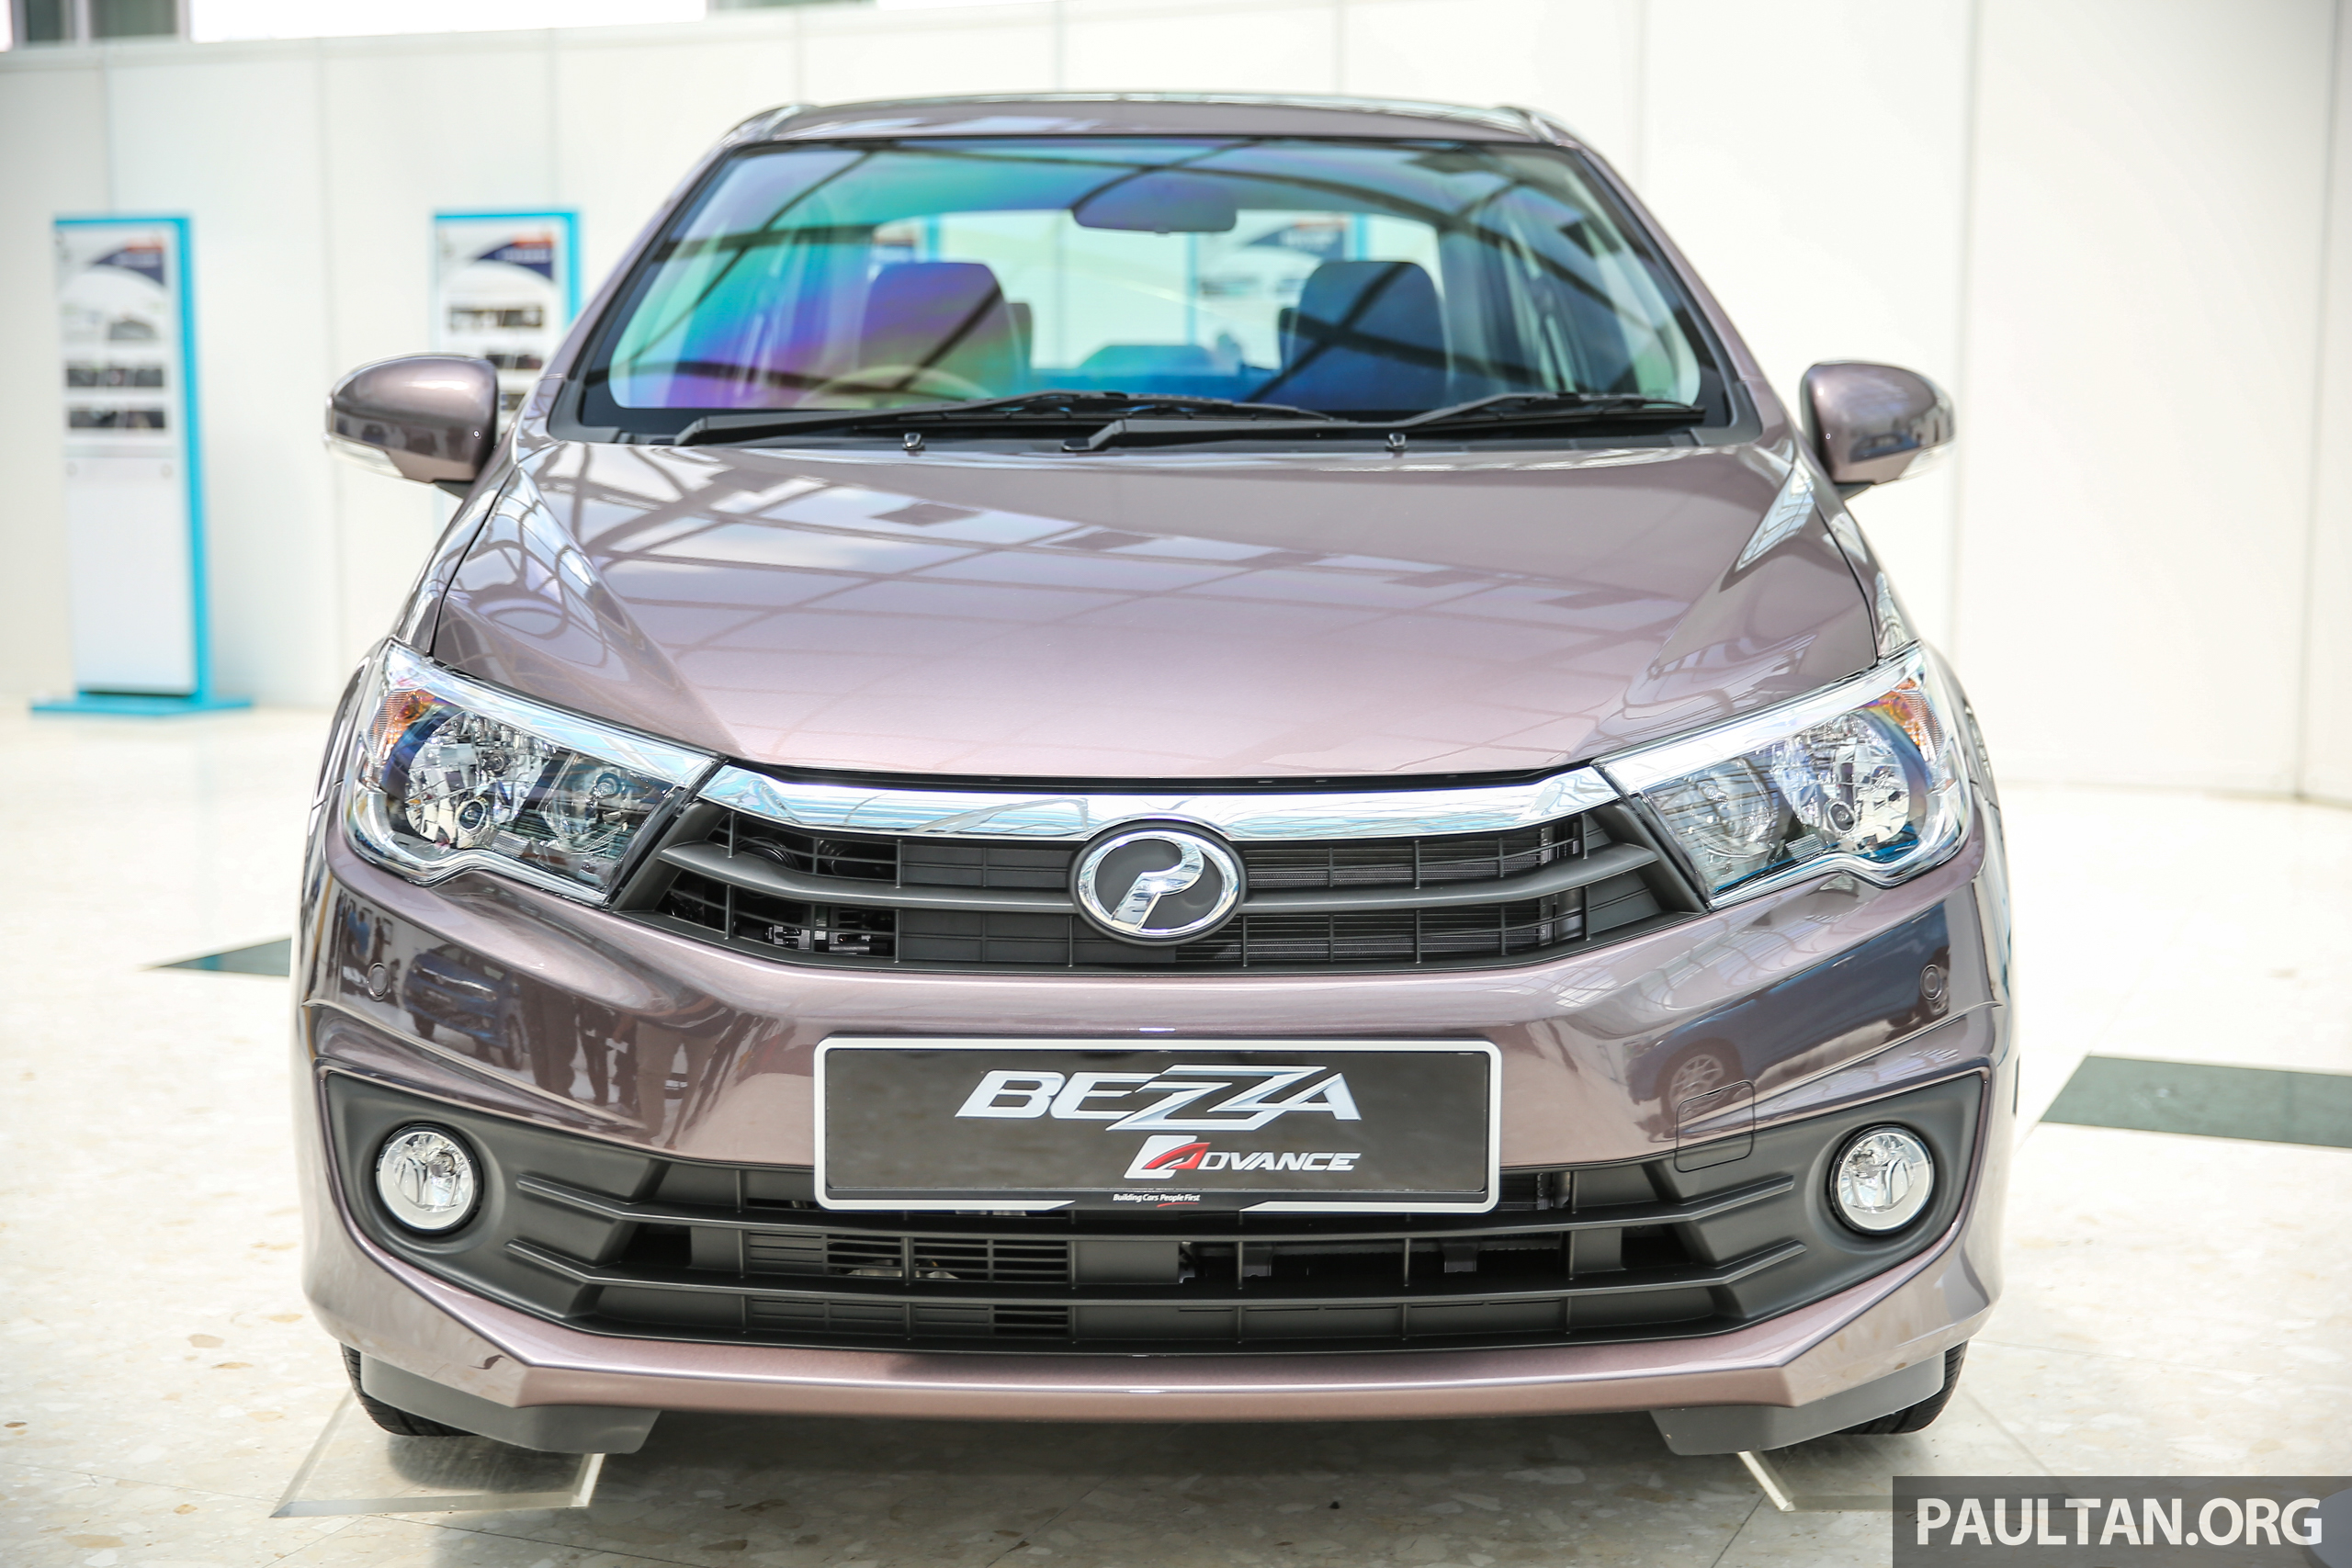 Perodua Bezza officially launched – first ever sedan, 1.0 